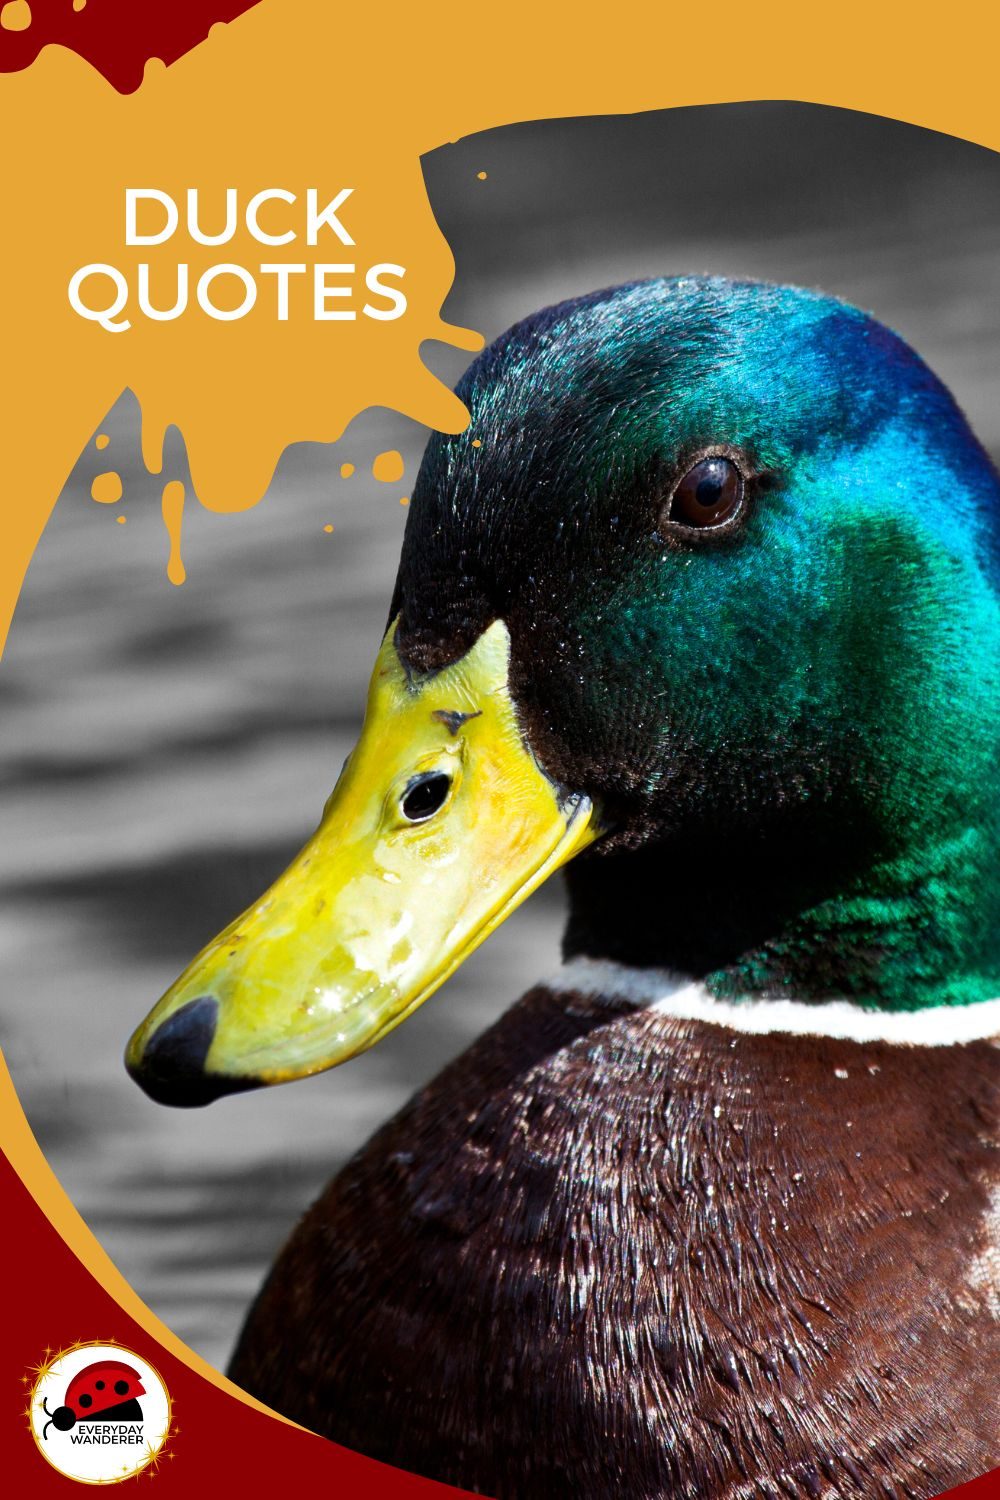 Duck Quotes - Pin 2 - JPG